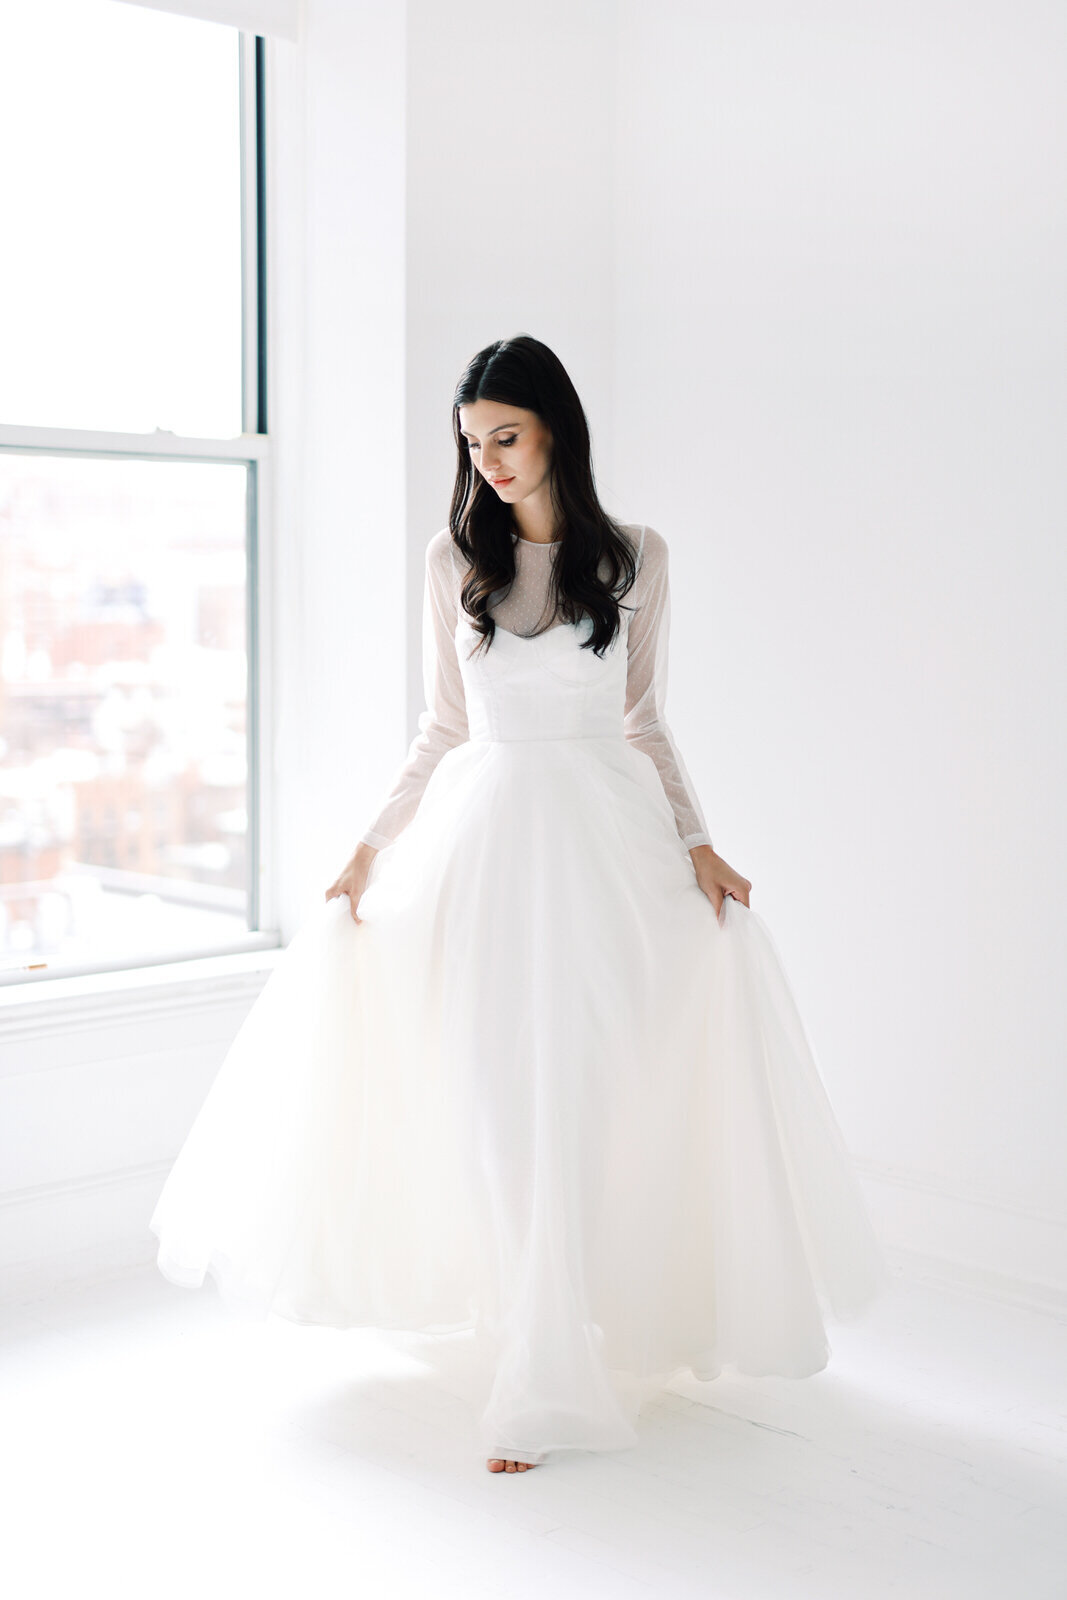 Stylish Bridal Editorial Photography for a New York City Brand 9